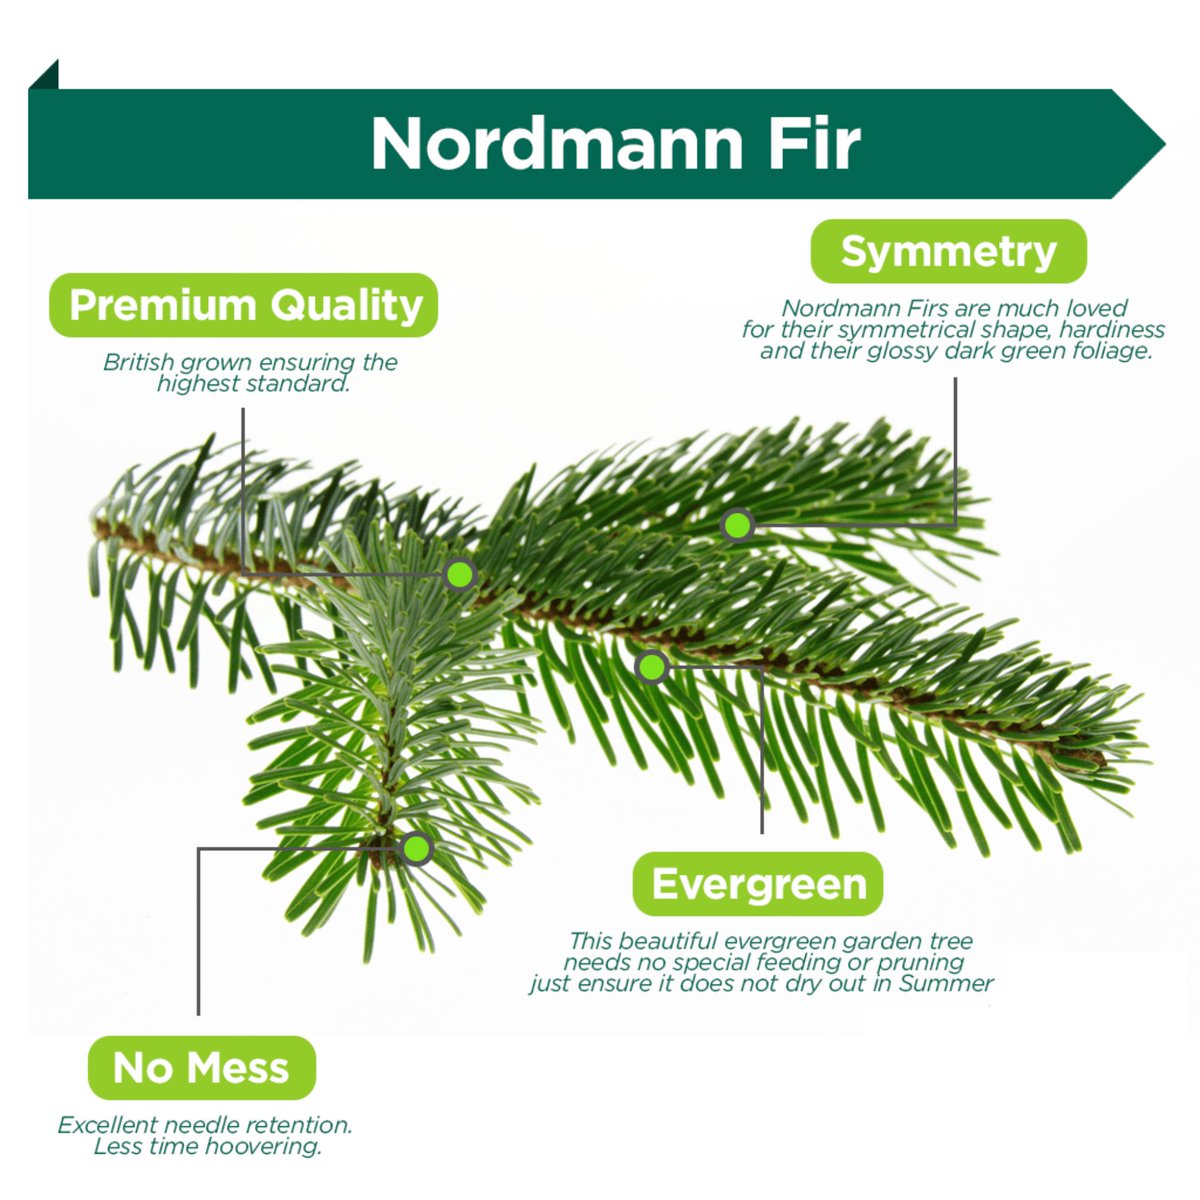 Not ordered your Tree from us yet? Don't worry, there's still a week to go to get your order in for your Premium pet friendly Nordmann Tree, then come along on Saturday 10 Dec with 2 or 4 legged friends and family to pick up your beauty register.enthuse.com/ps/event/Chris…